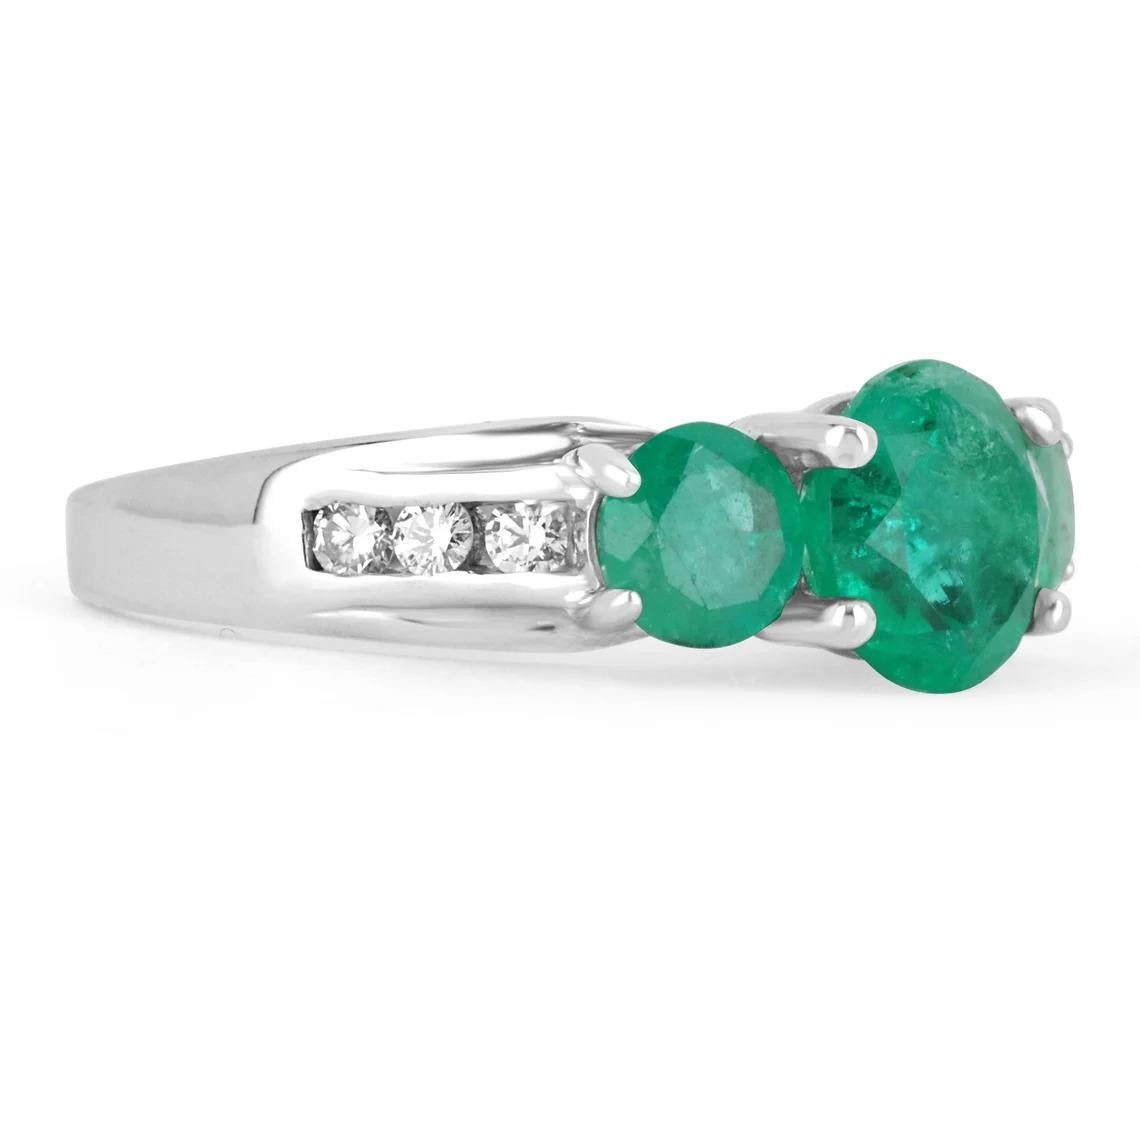 Elegantly displayed is a gorgeous three-stone round emerald and diamond accent engagement ring. This romantic engagement ring is captivating from every angle. The brilliant round Colombian emeralds are medium-dark deep green and have very good